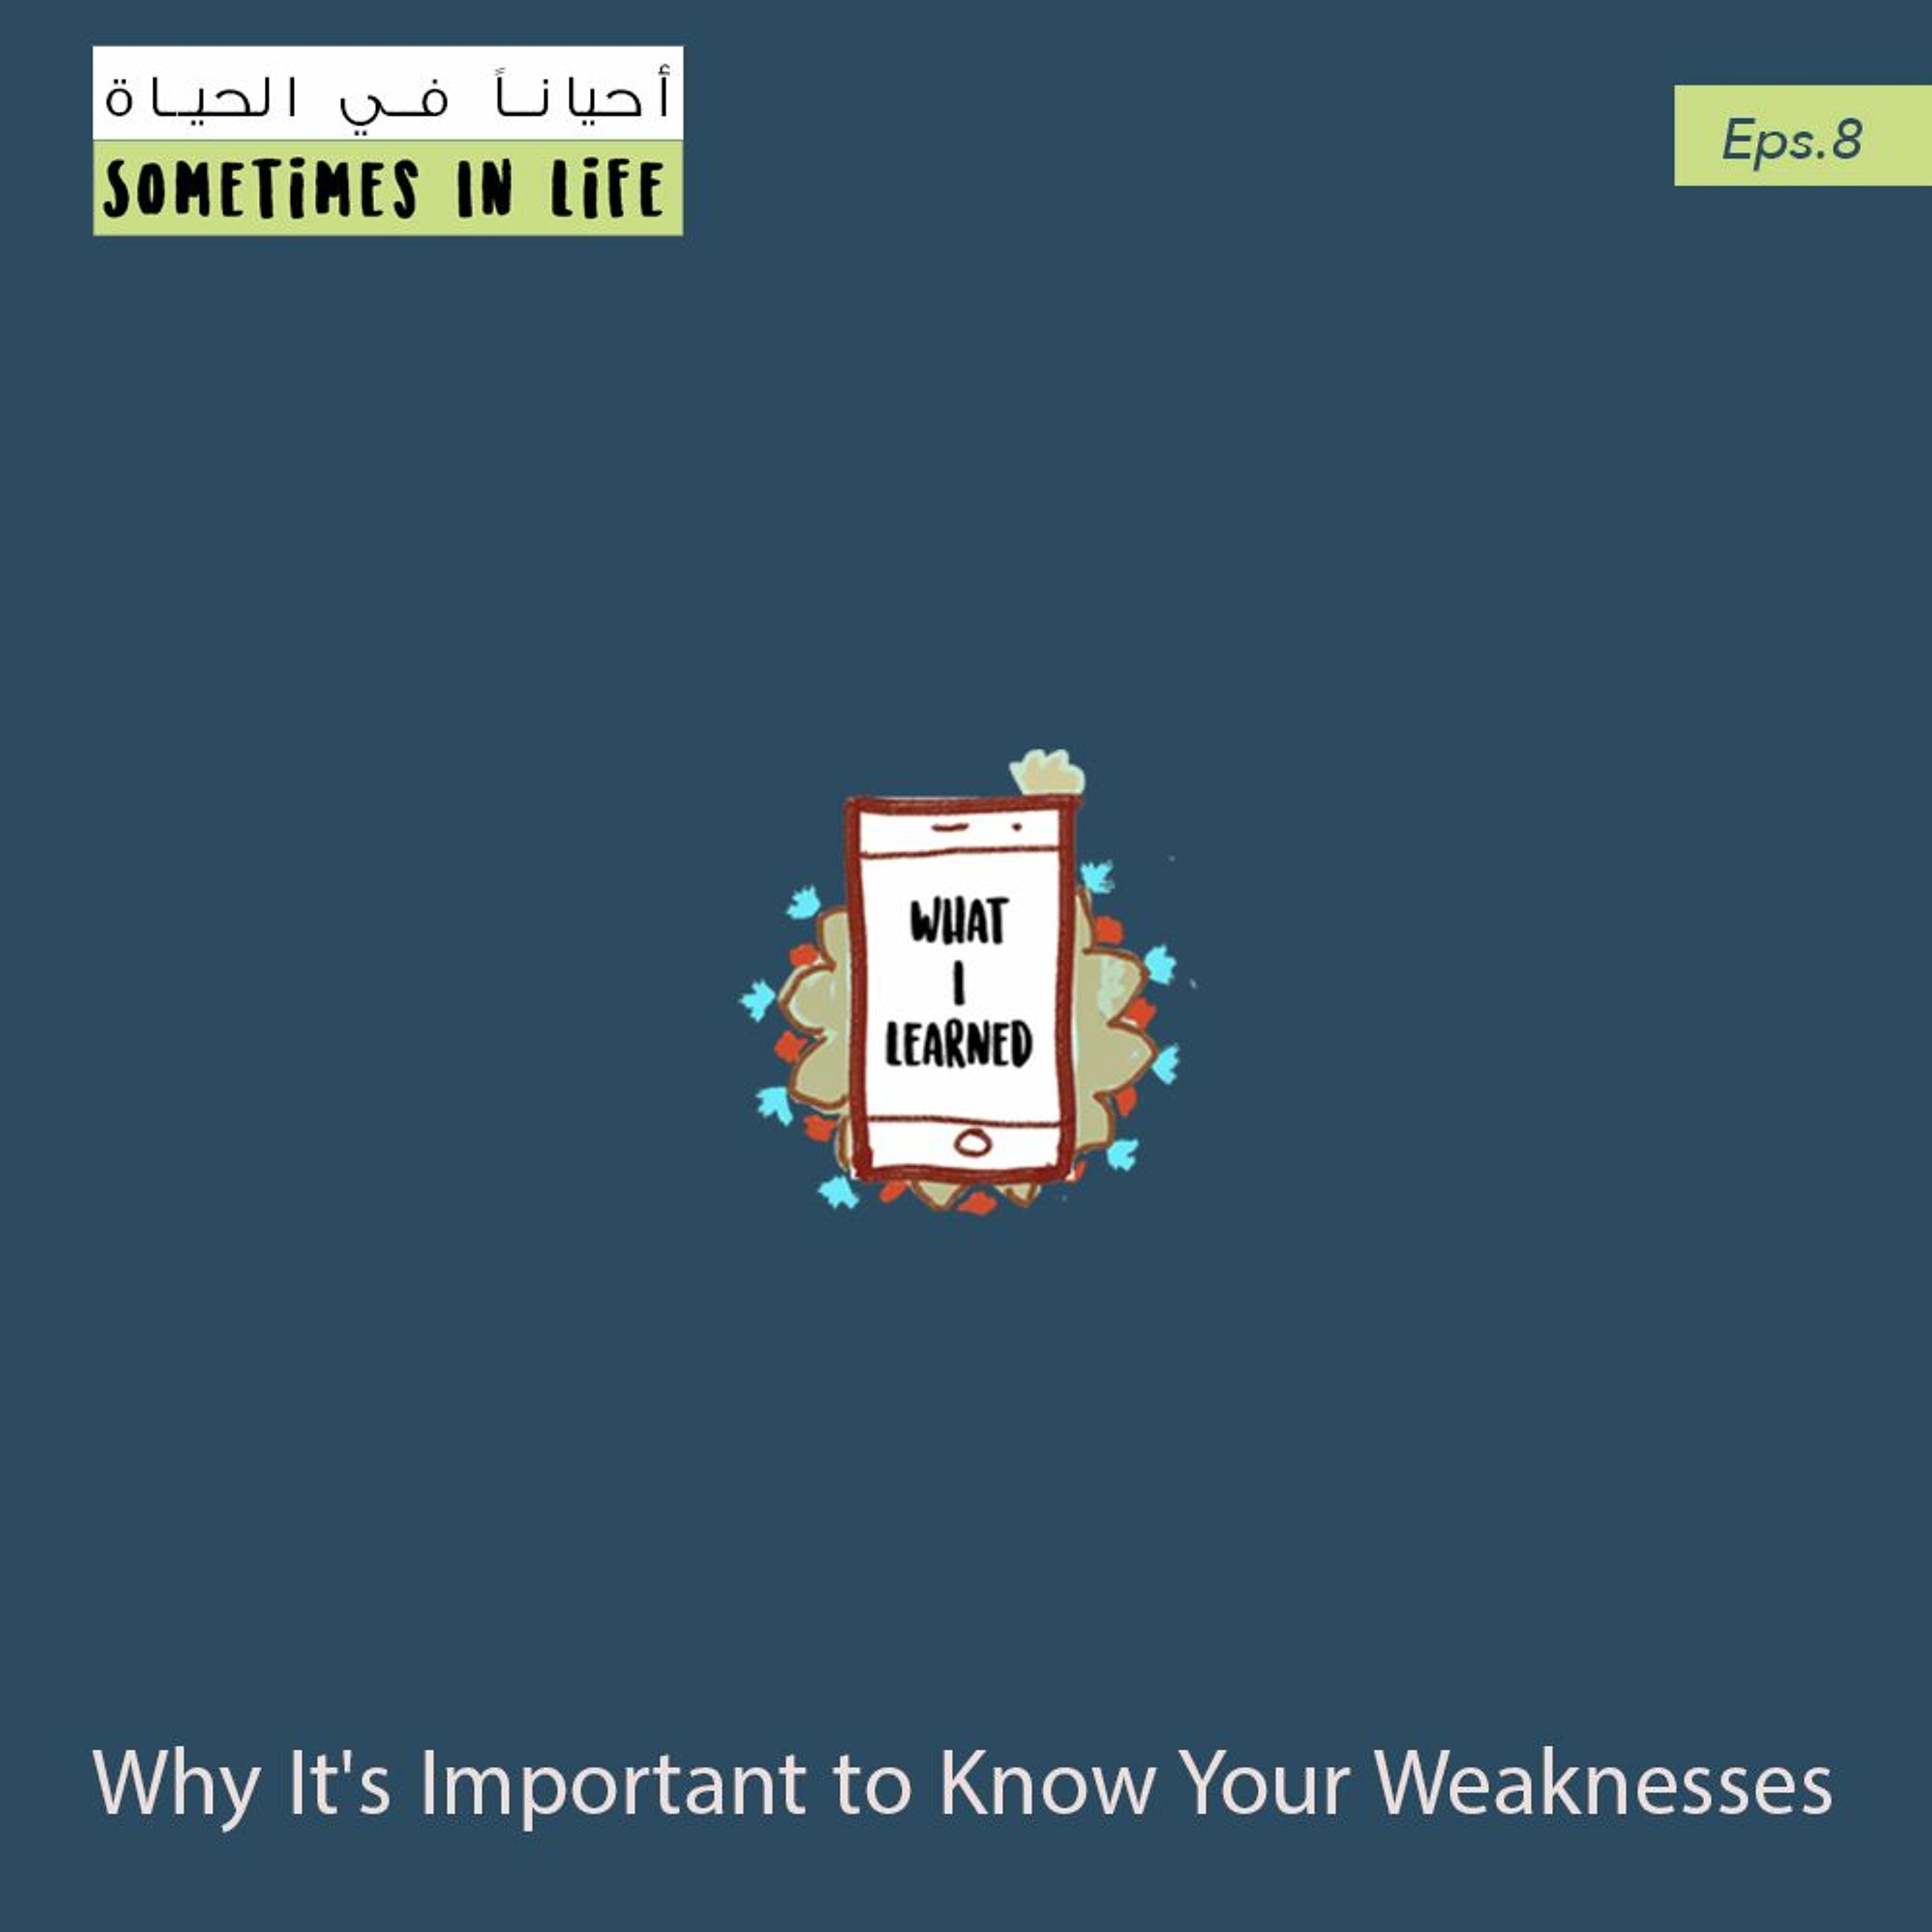 8: Why It's Important to Know Your Weaknesses